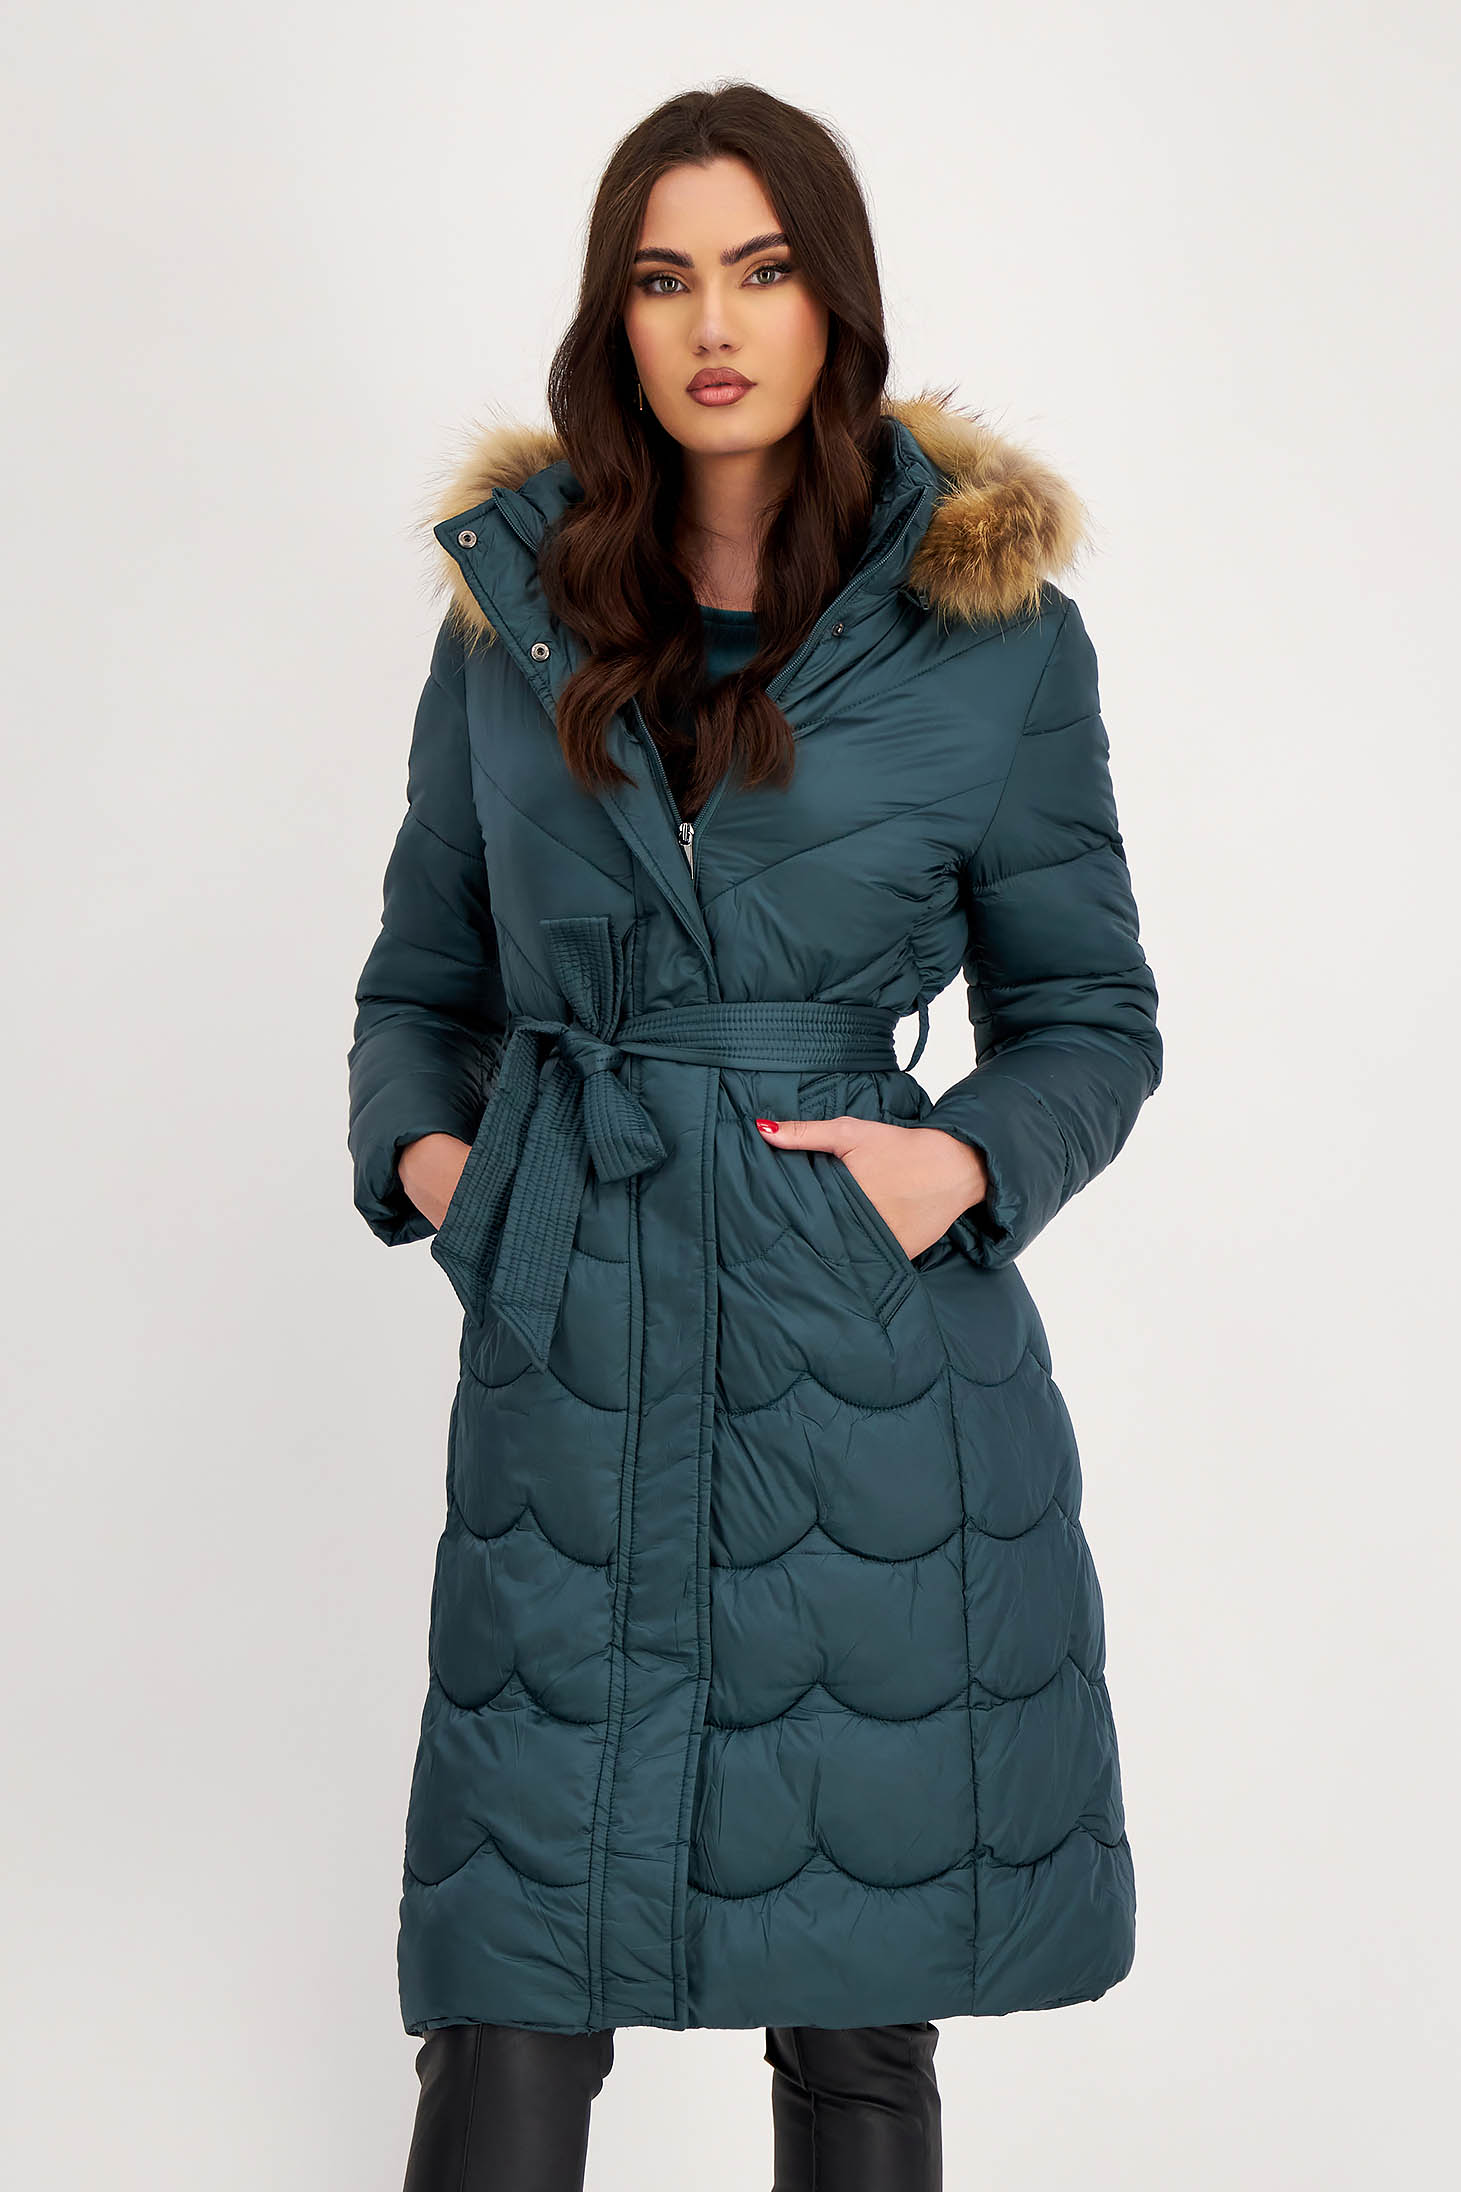 Dark green long shell jacket with a straight cut accessorized with natural fur on the hood